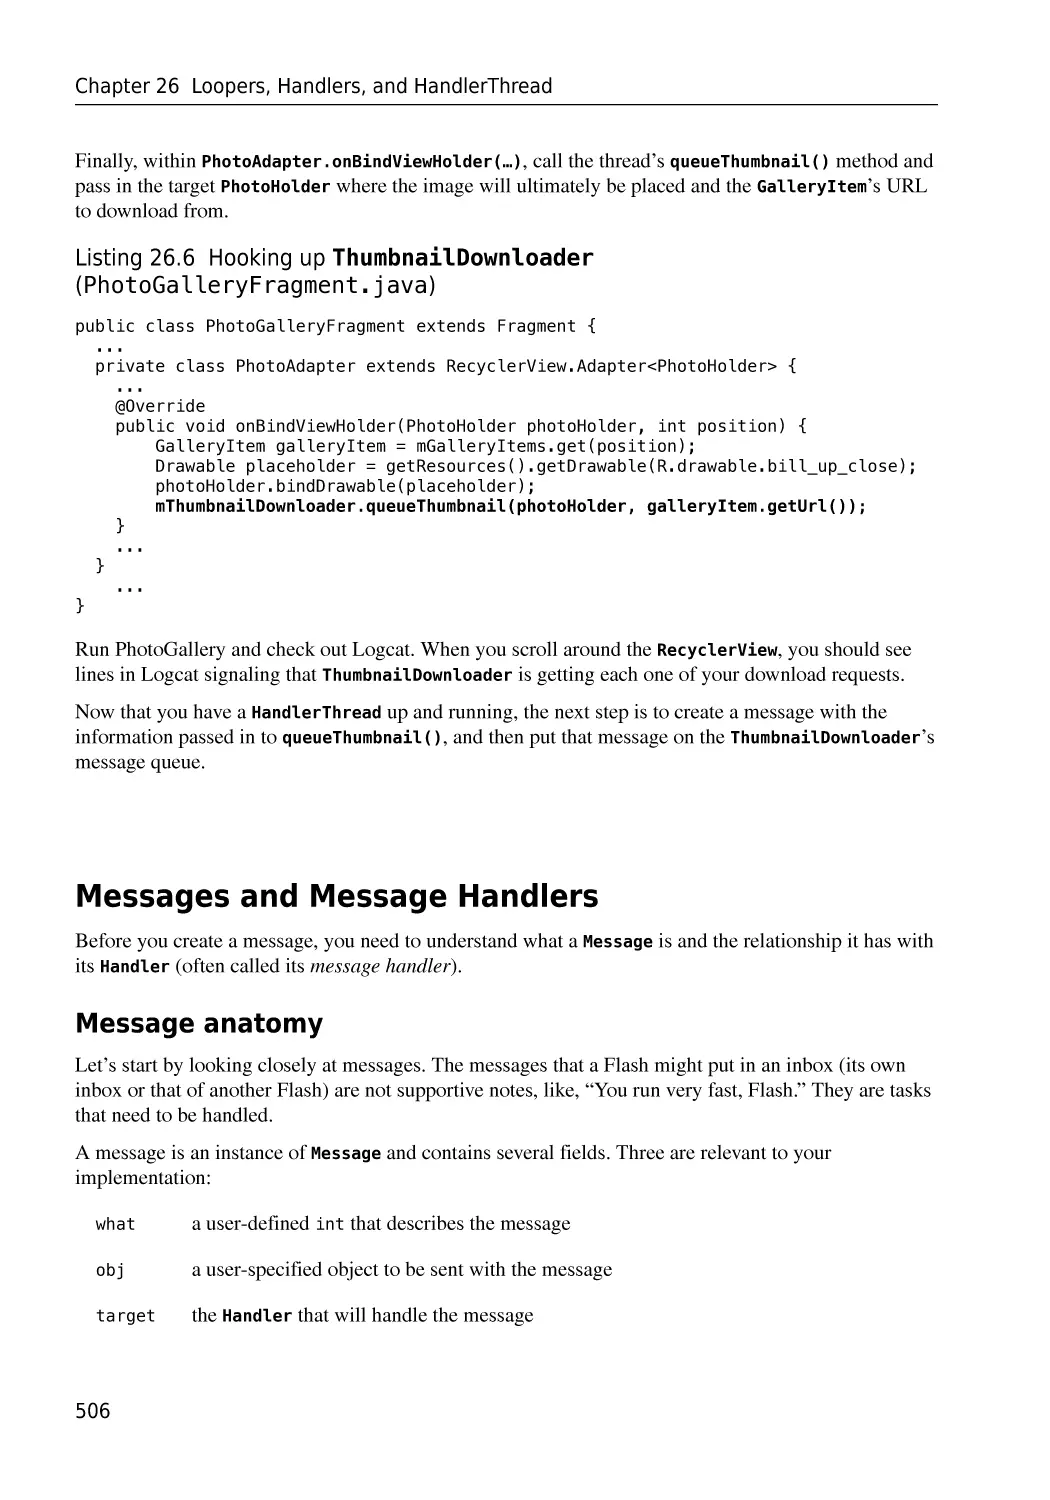 Messages and Message Handlers
Message anatomy